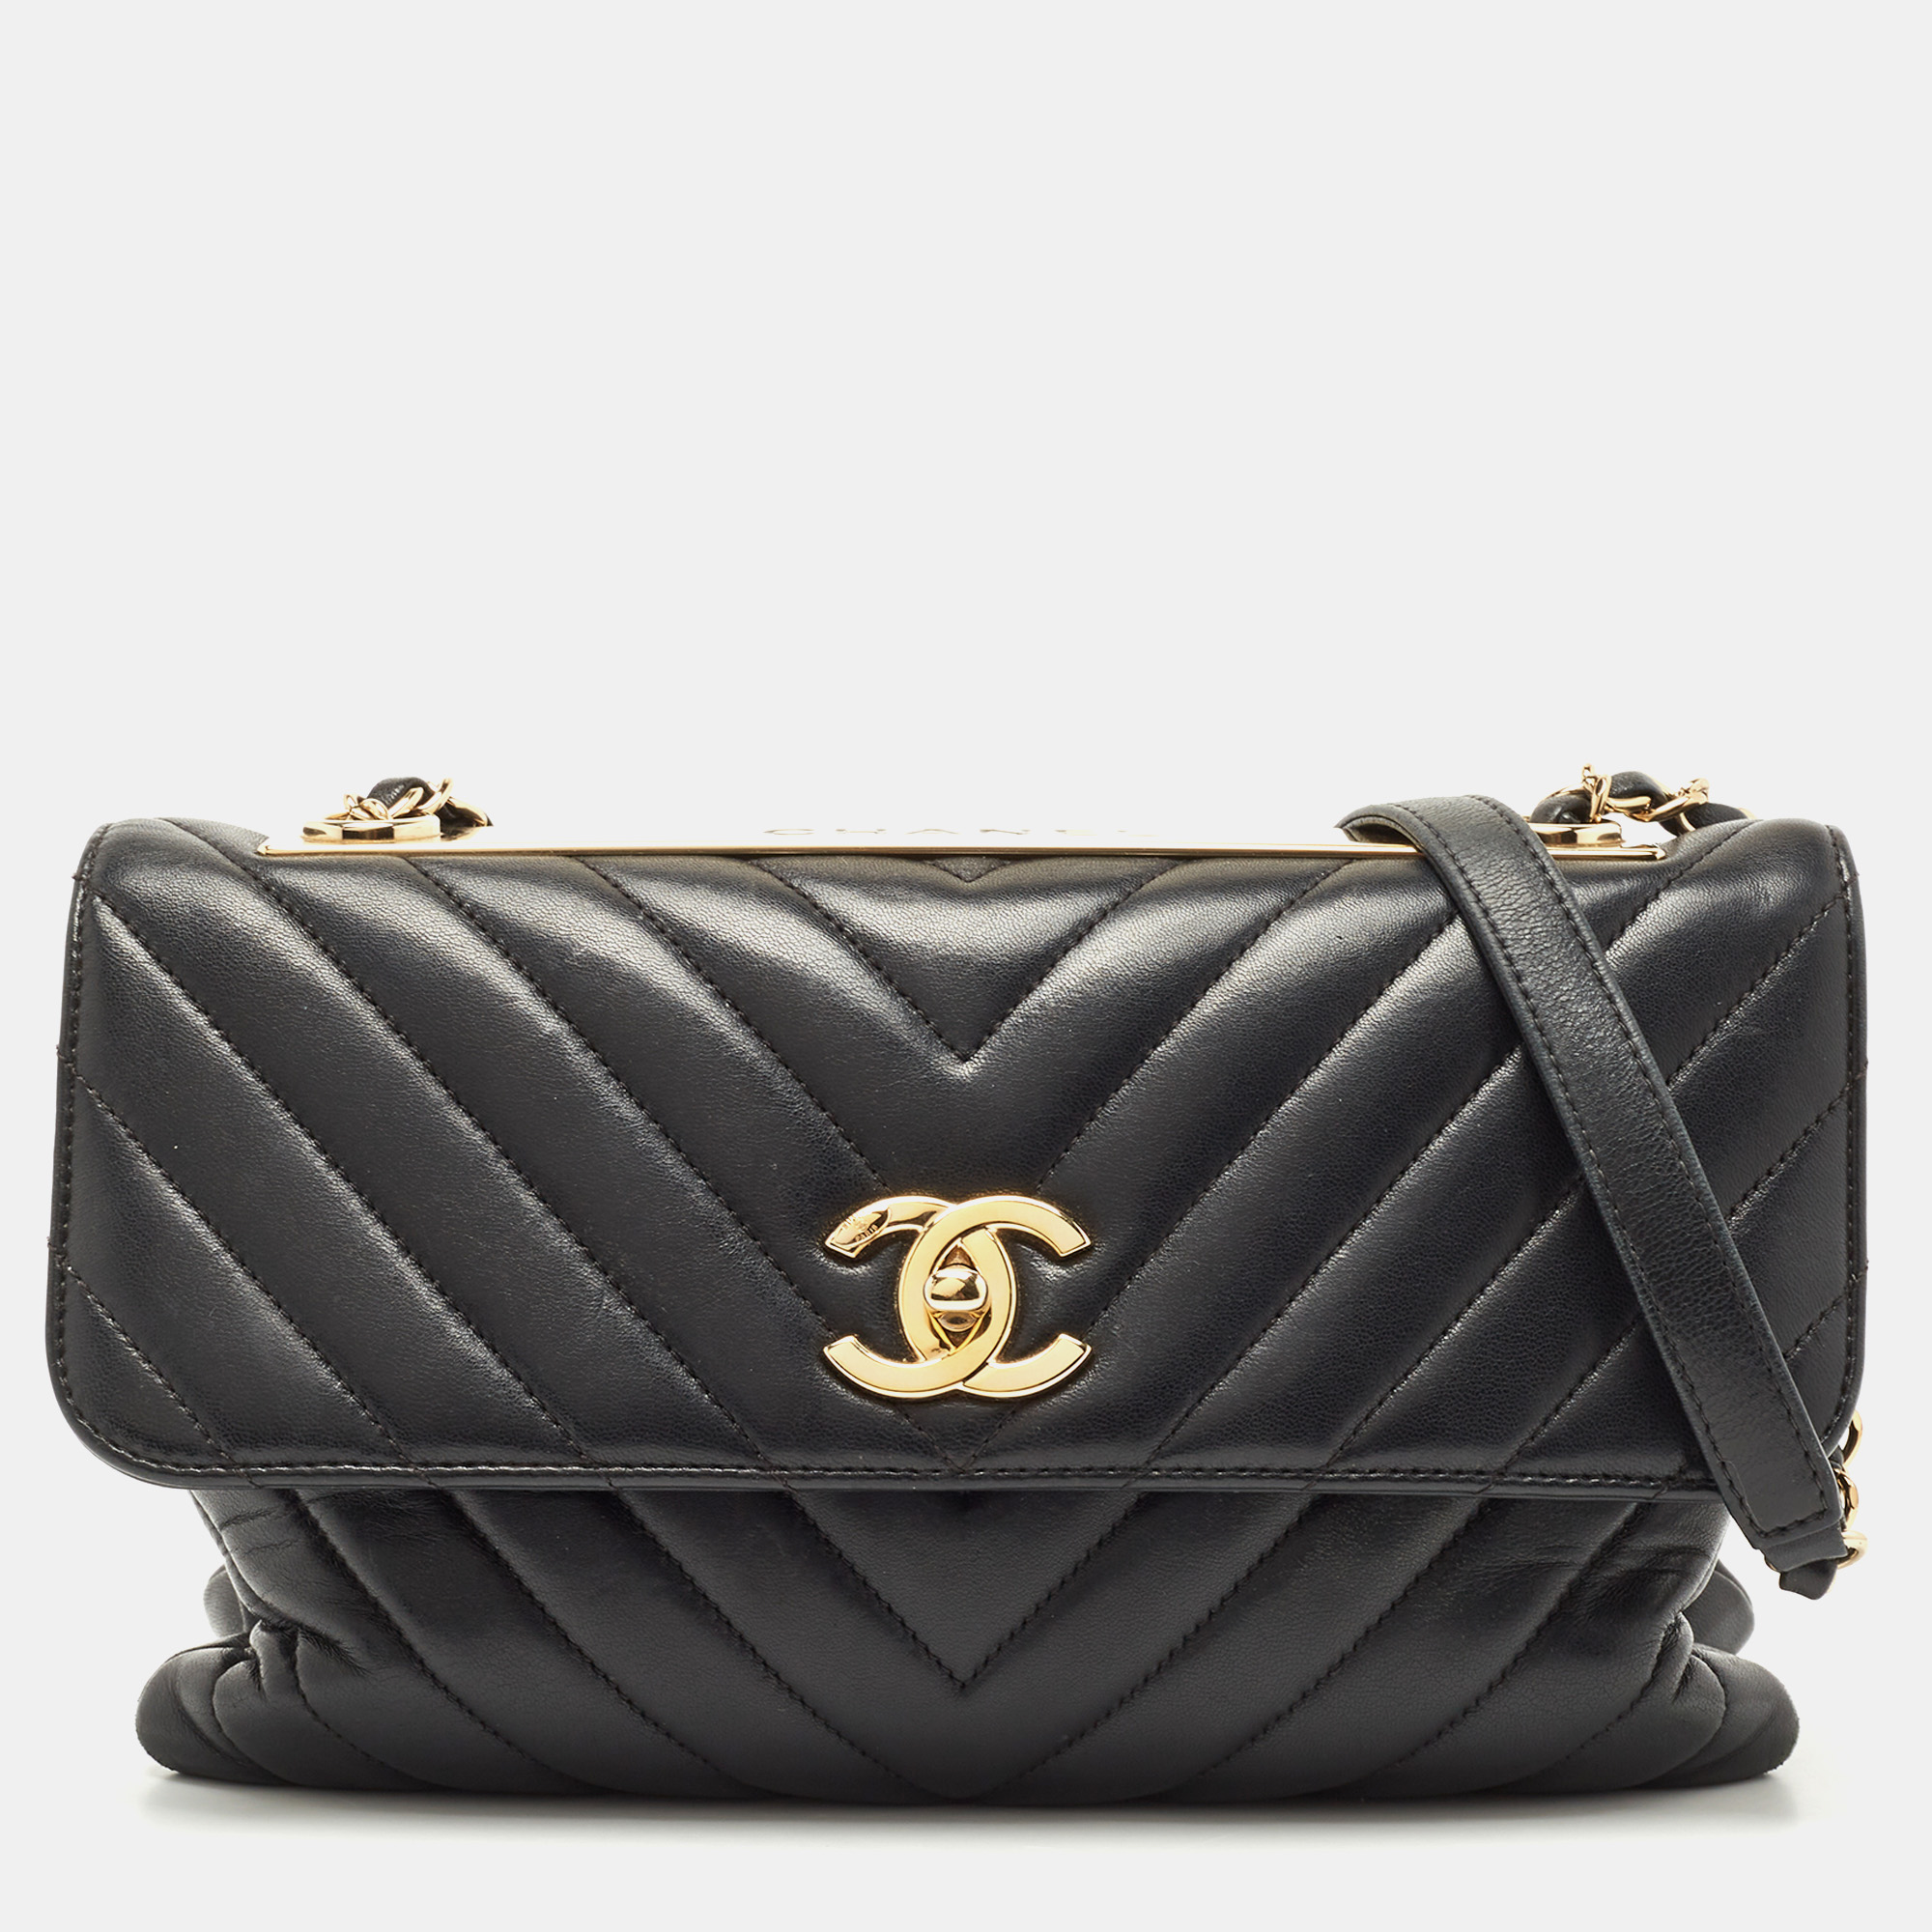 Pre-owned Chanel Black Chevron Leather Trendy Cc Flap Bag